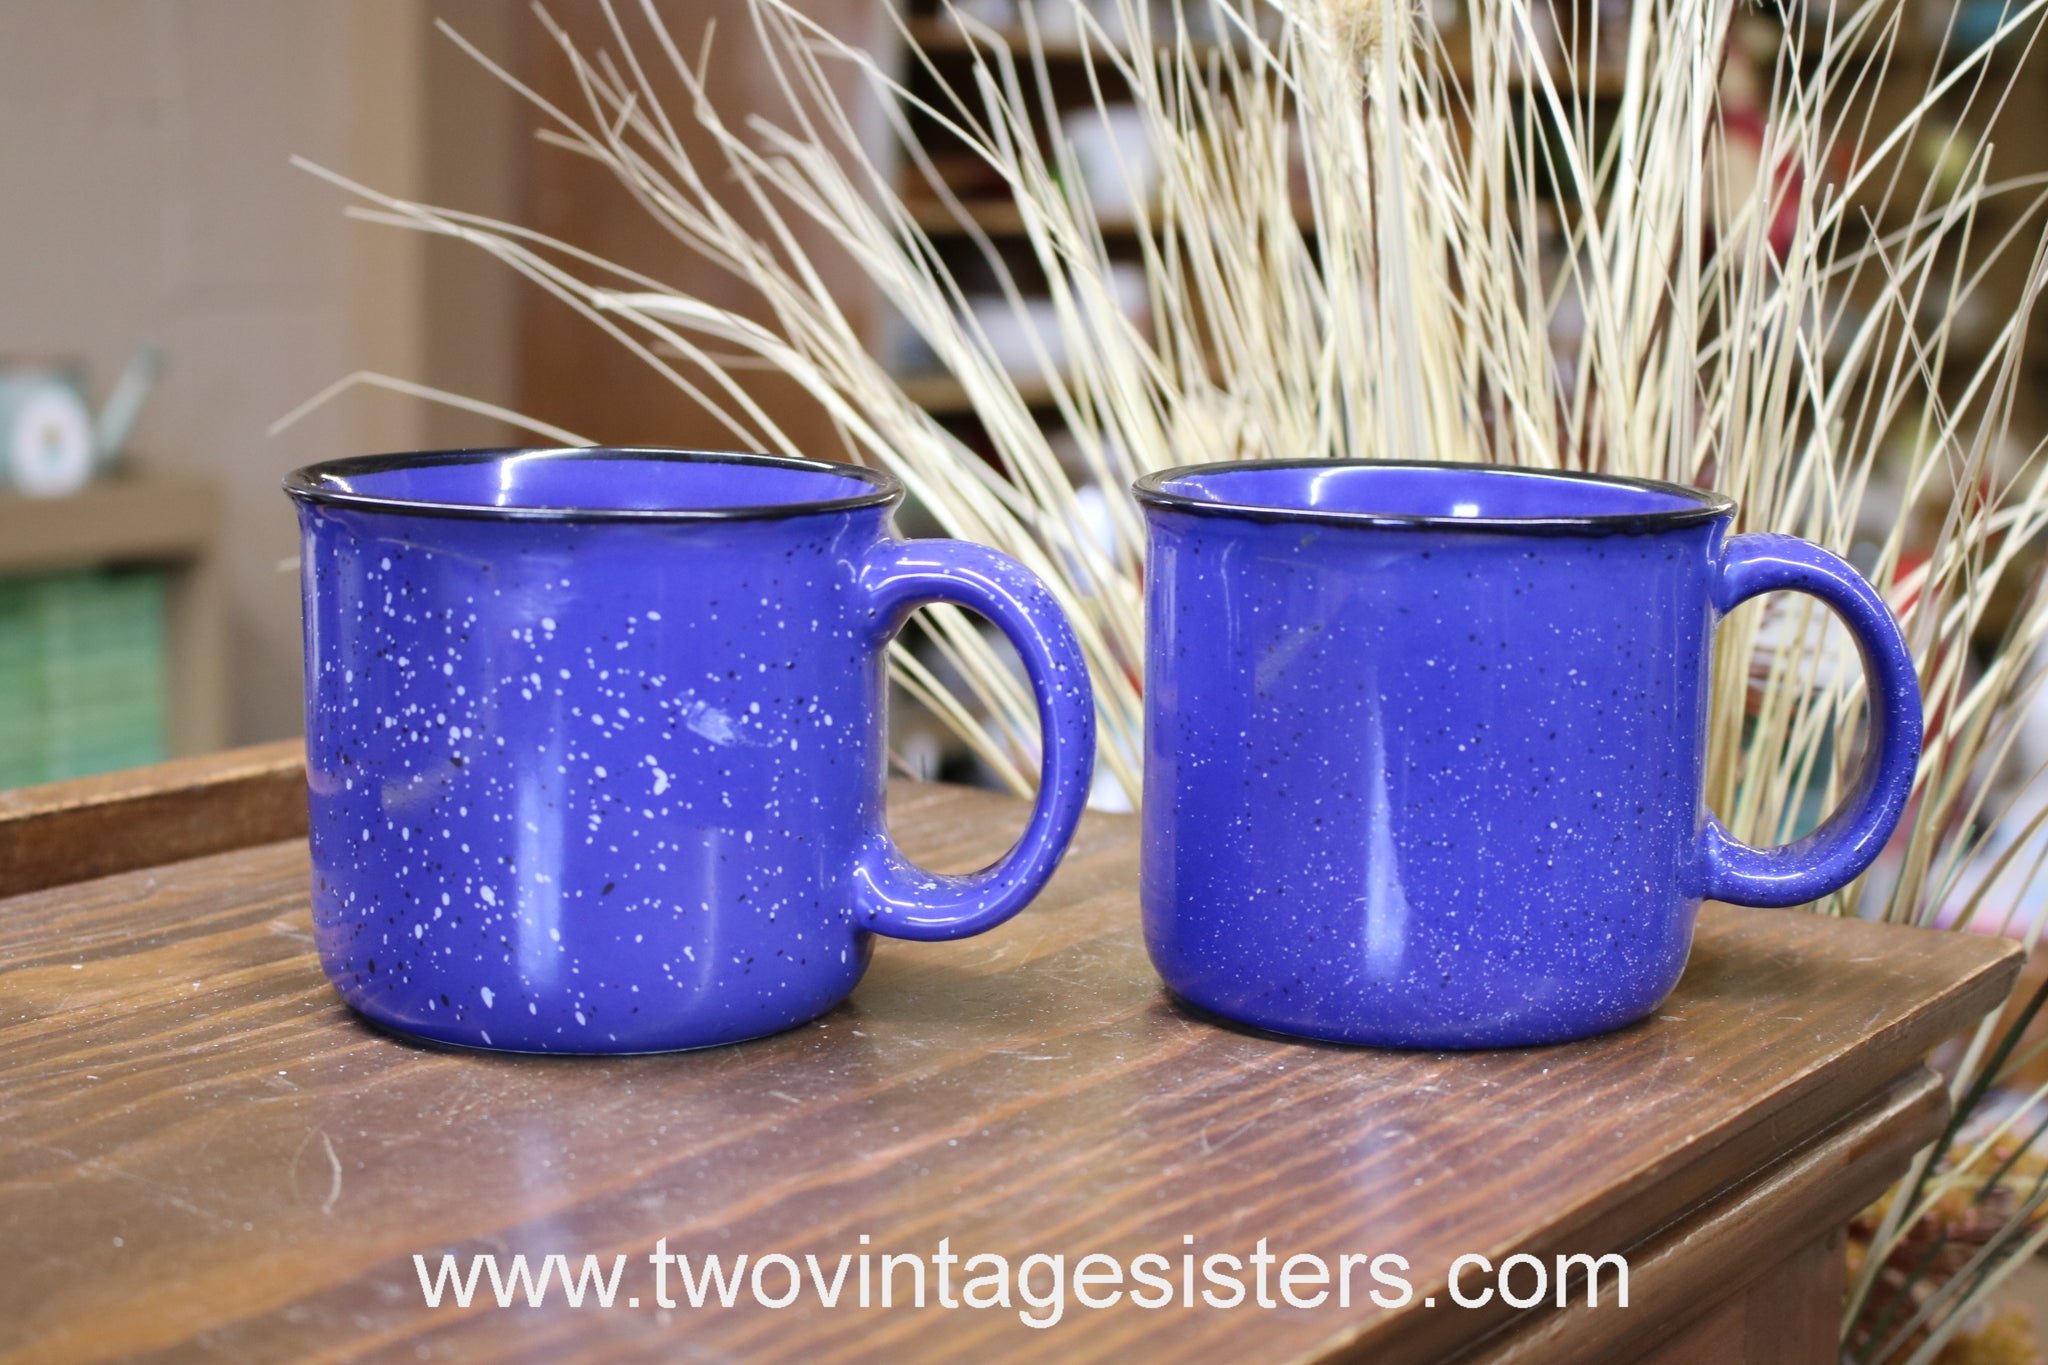 Camping Coffee Mugs Blue White Speckled Enamelware Set